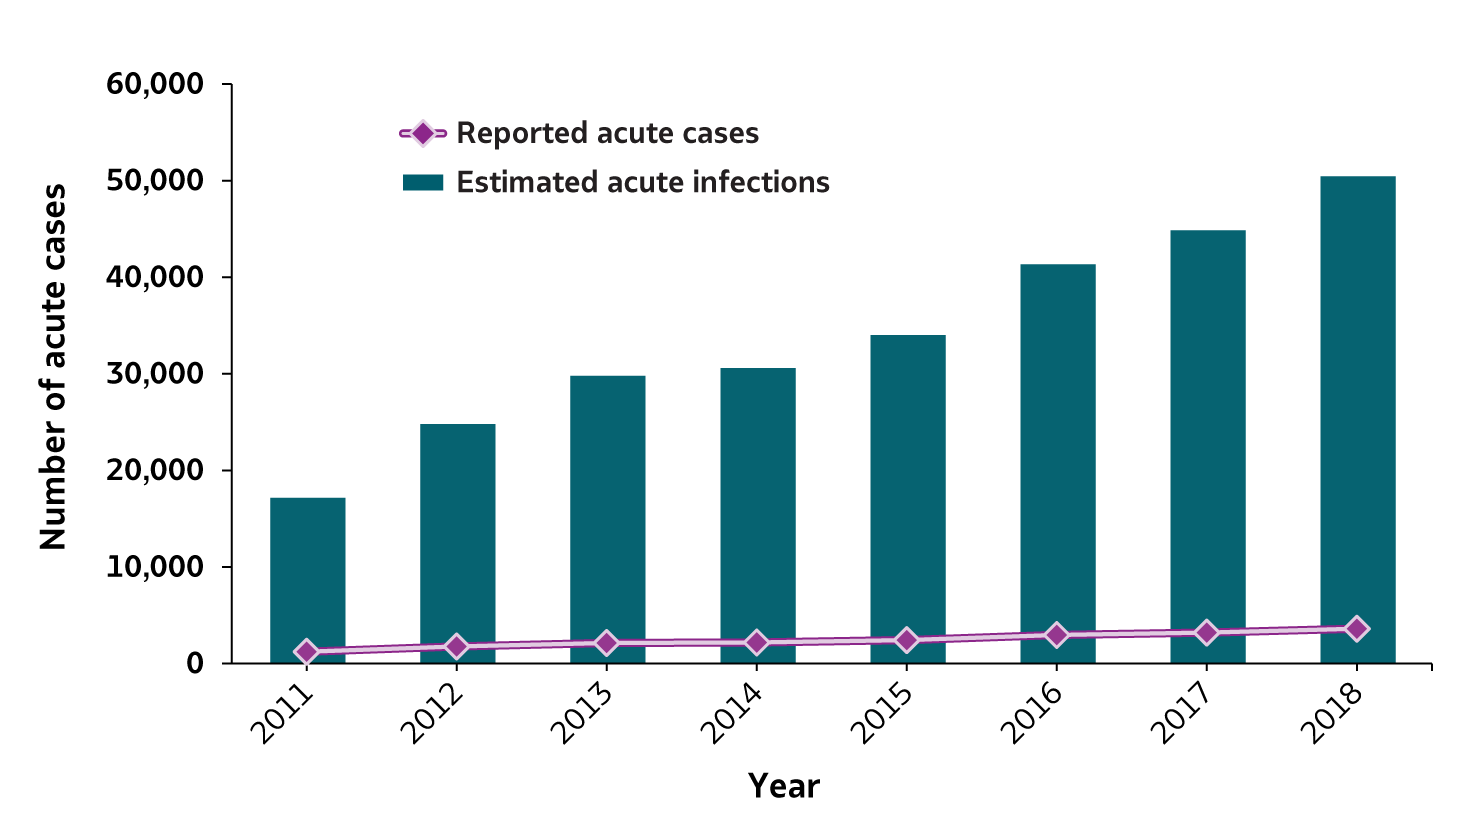 Figure 3.1 This figure shows the number of reported cases of acute hepatitis C and estimated acute hepatitis C infections for 2011 through 2018.  The number of reported acute hepatitis C cases and estimated acute hepatitis C infection generally increased each year during the time period. In 2018 there were 3,621 reported cases of acute hepatitis C and 50,300 estimated acute hepatitis C infections. 